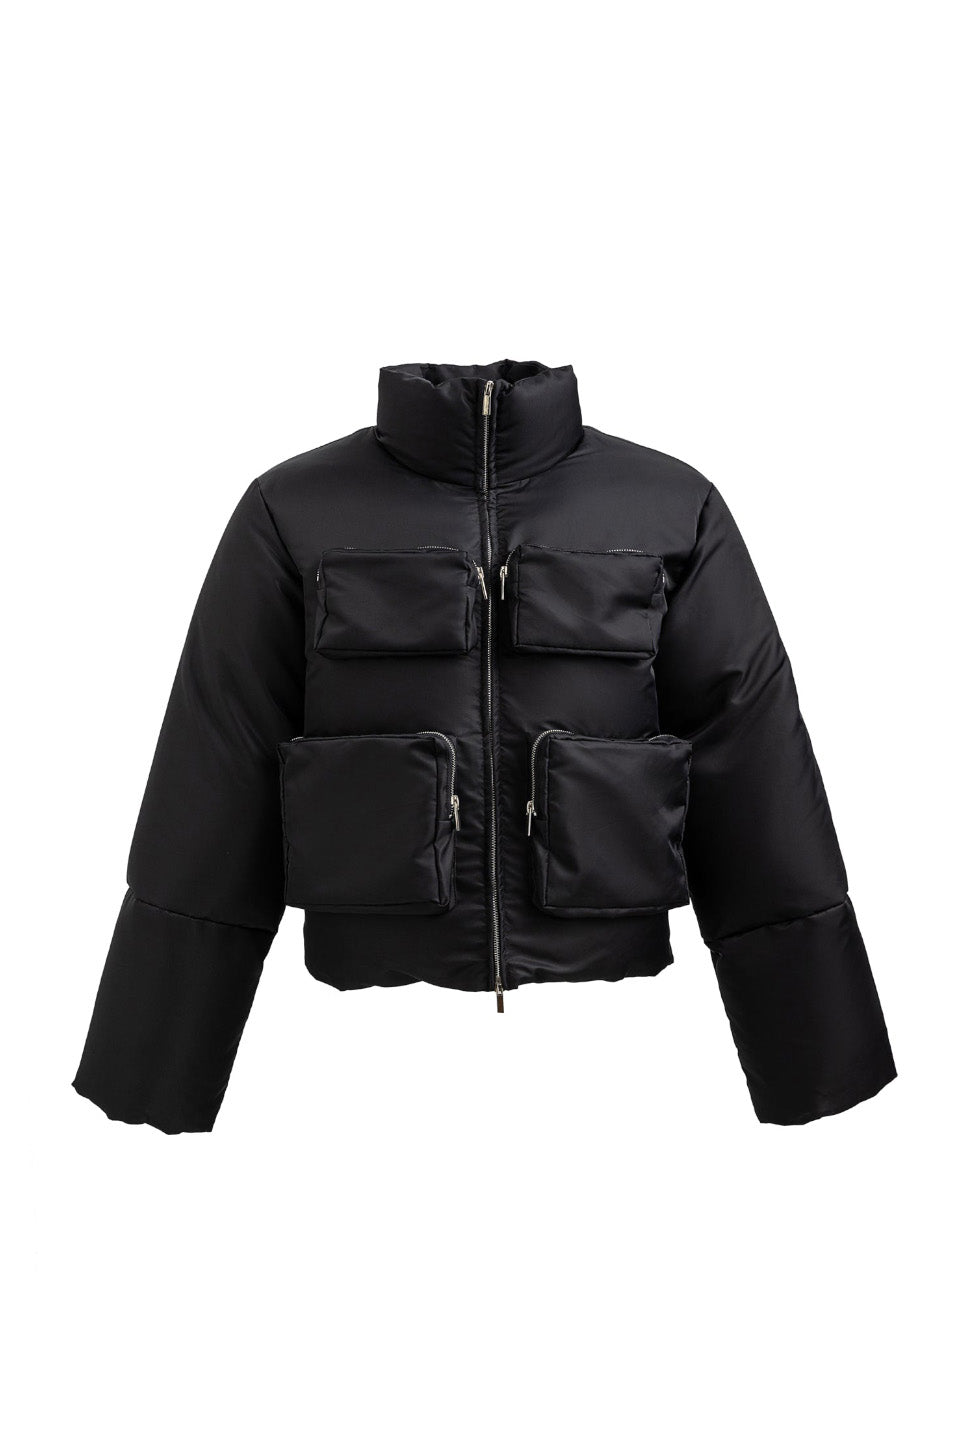 FRKM SCD - Tactical Quilted Down Jacketカラーブラック